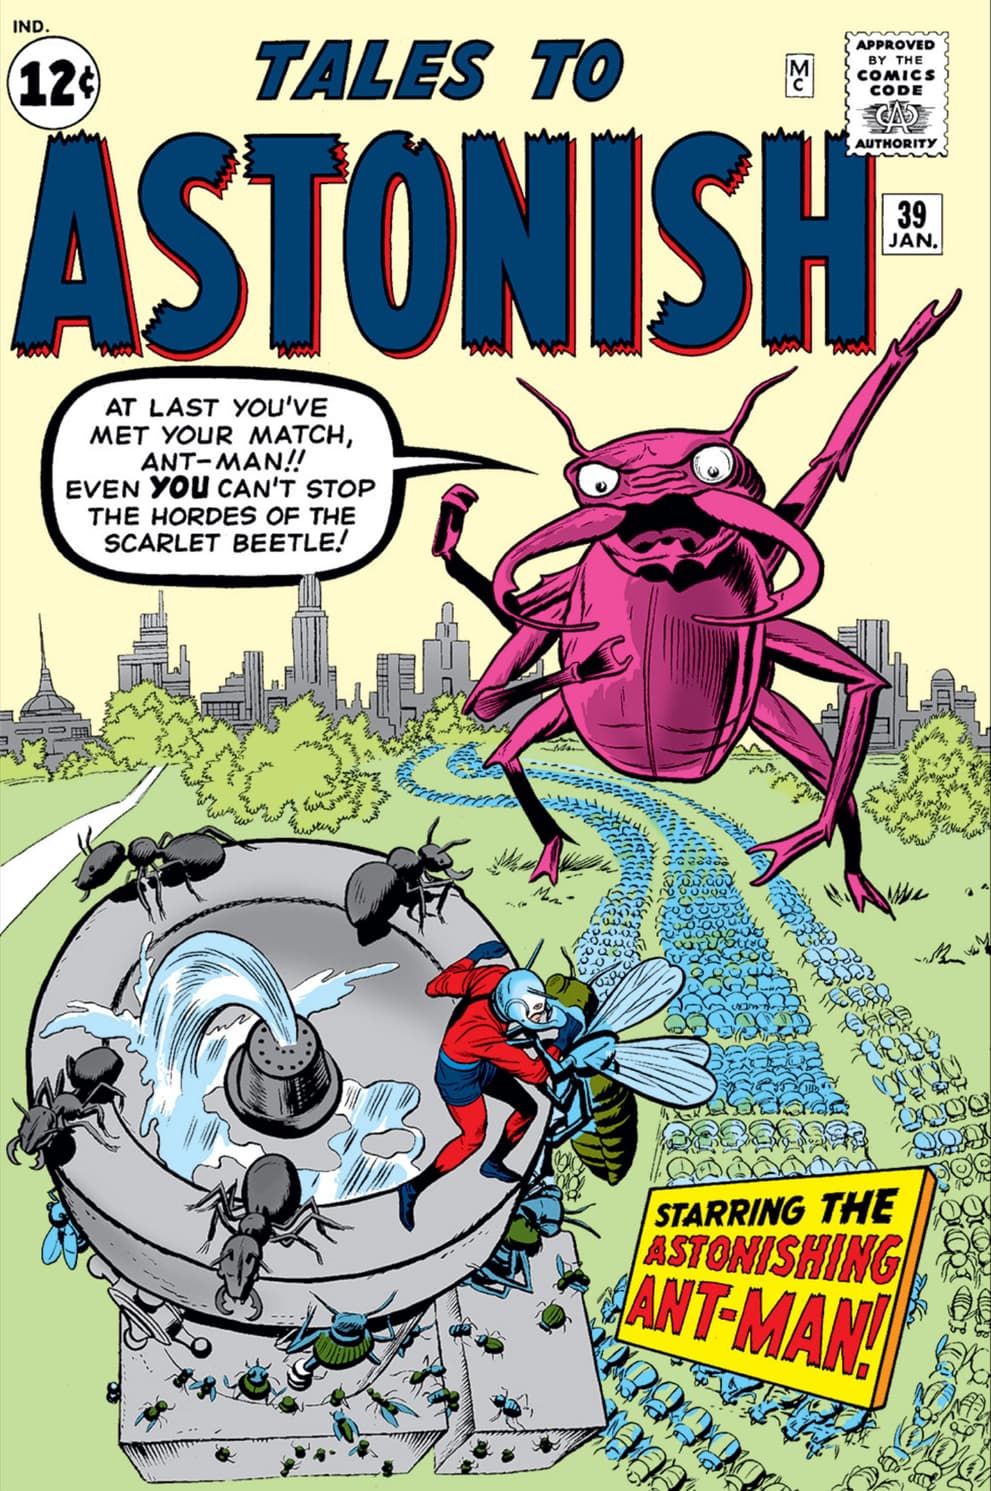 TALES TO ASTONISH (1959) #39 cover by Jack Kirby, Dick Ayers, and Stan Goldberg